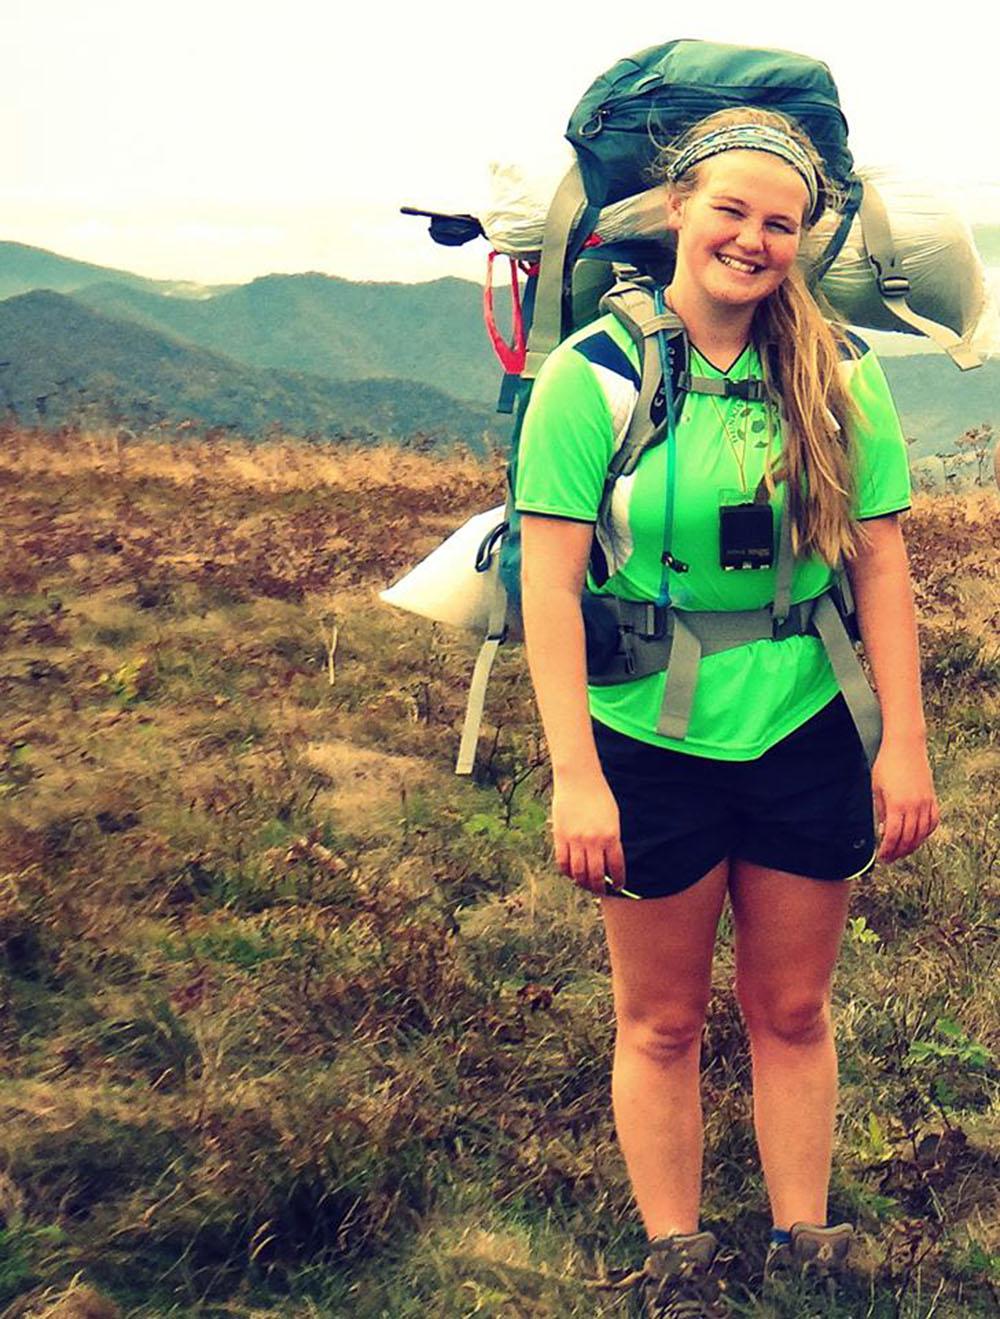 Sophomore geology major Cameron Batchelor was recently awarded a $2,000 grant by the  Explorers Club to help fund her participation  in a research project in Mongolia this summer. Photo courtesy of Cameron Batchelor